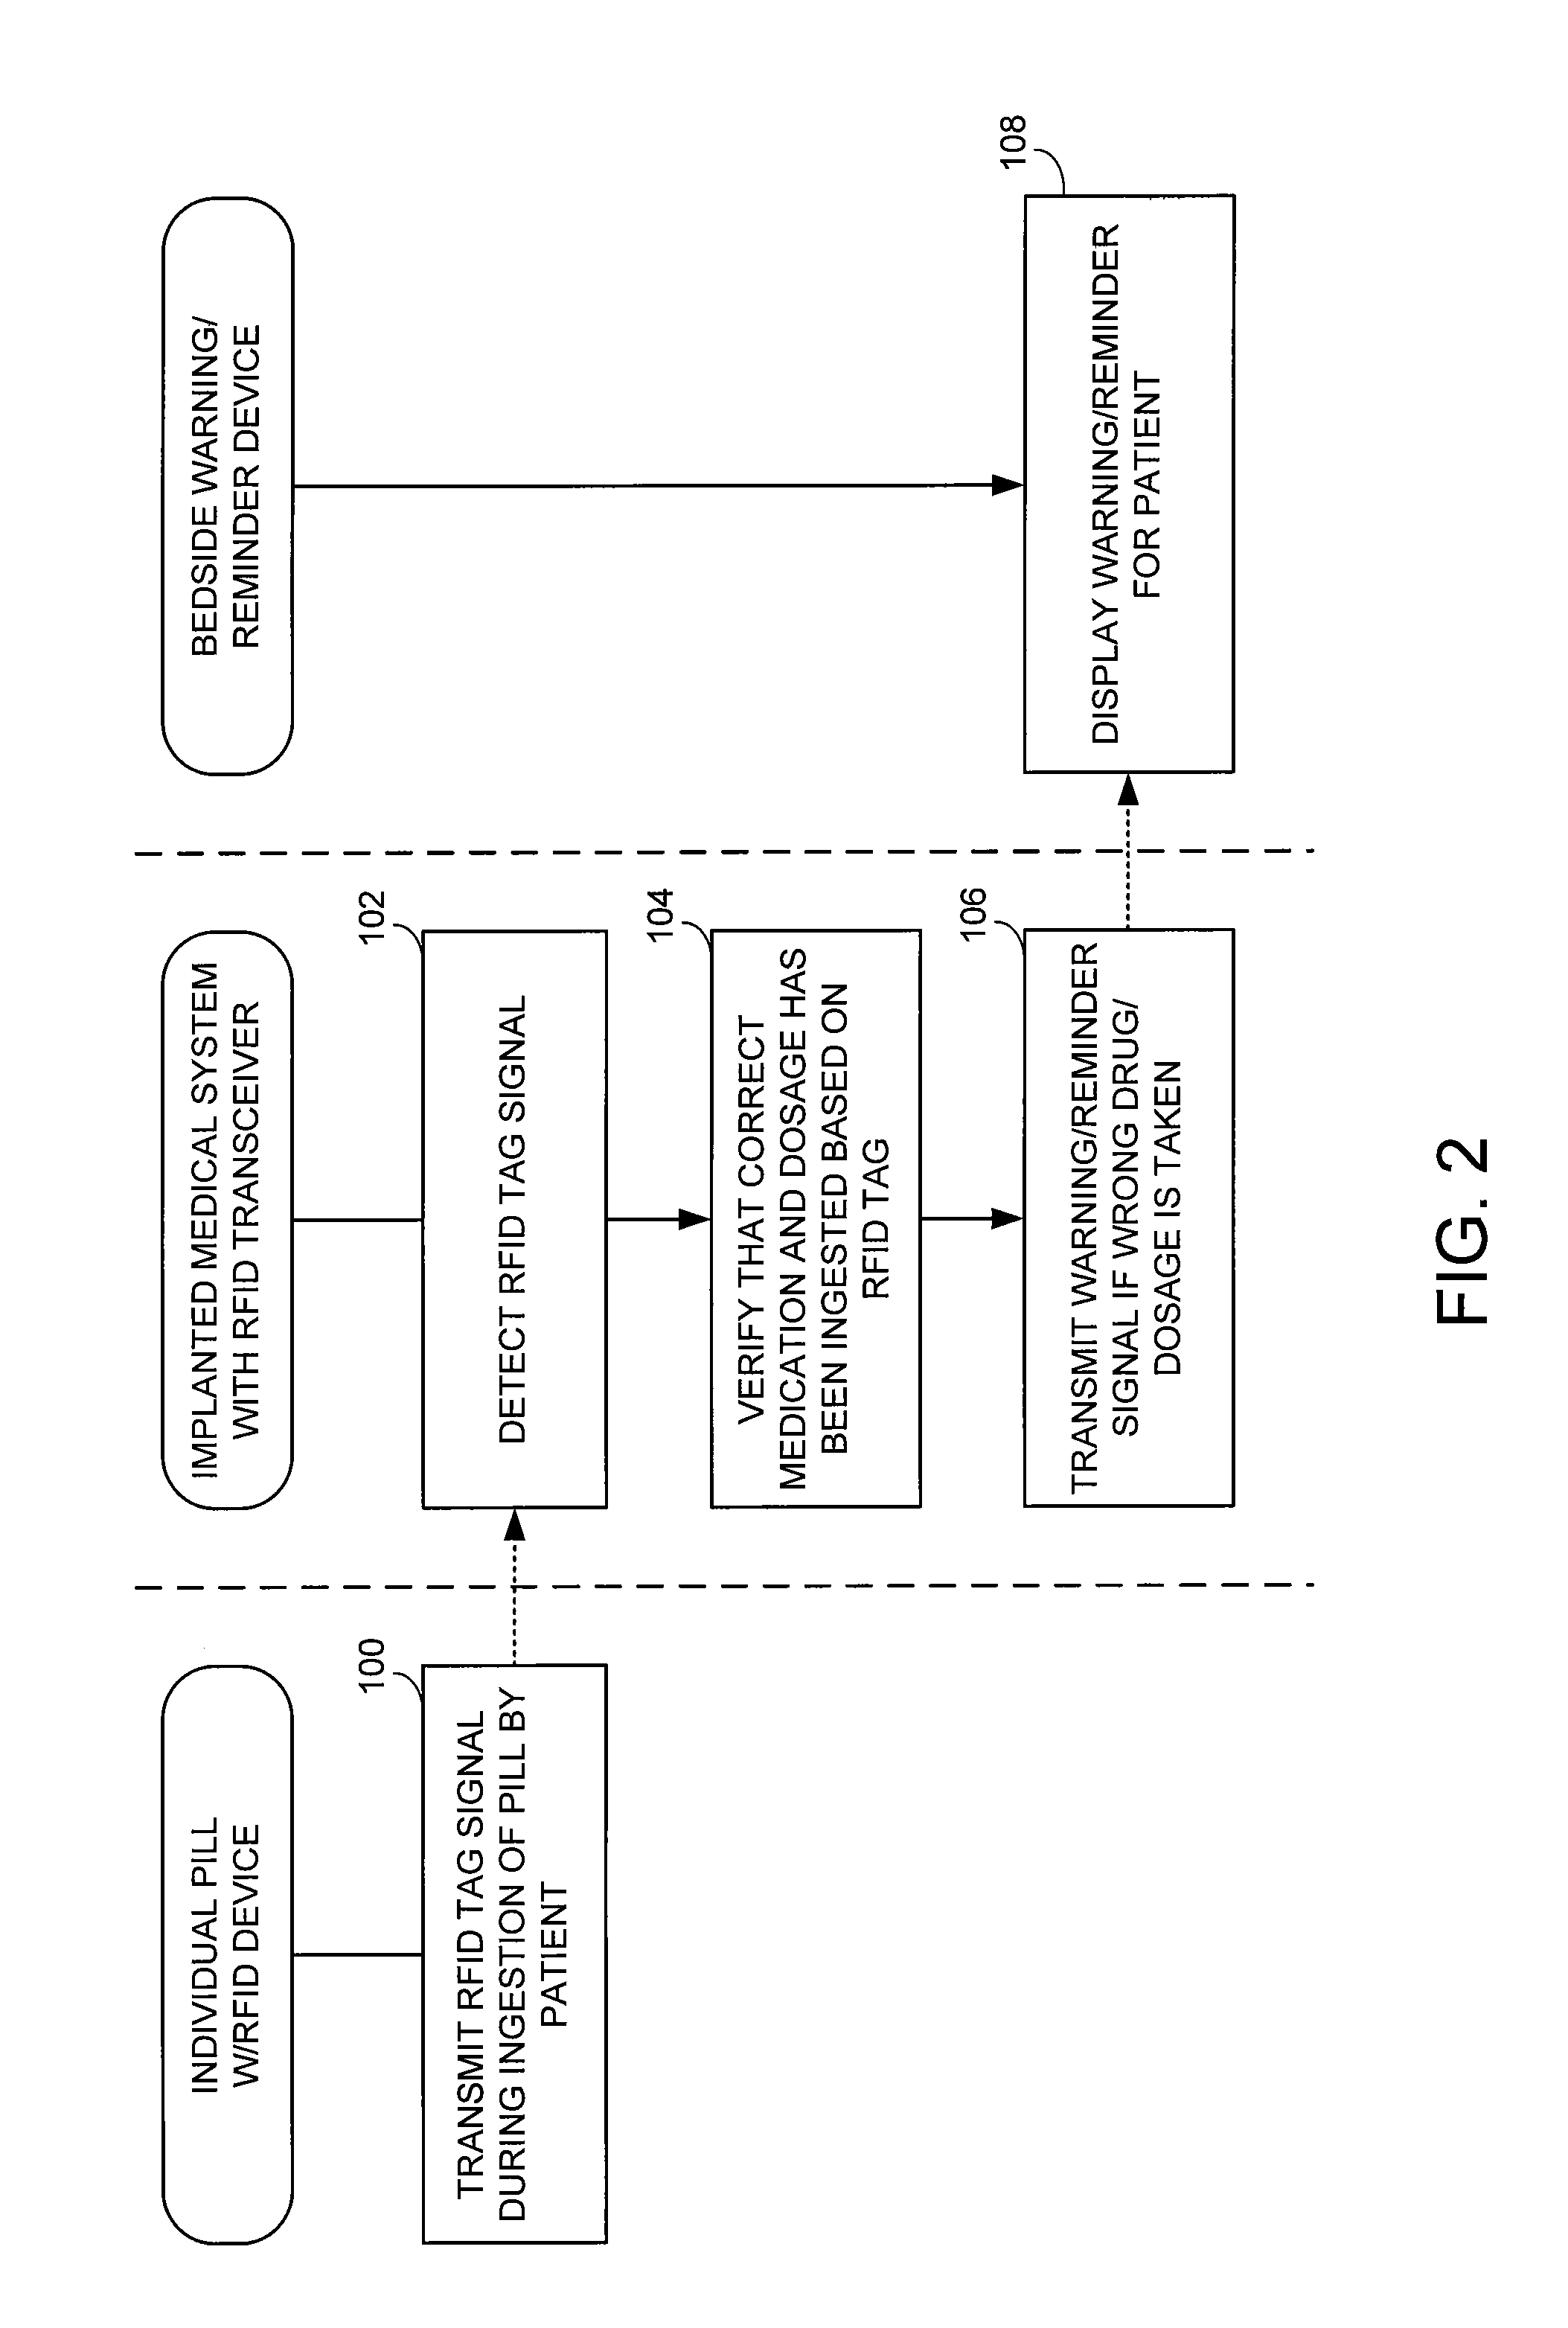 Method and apparatus for monitoring ingestion of medications using an implantable medical device